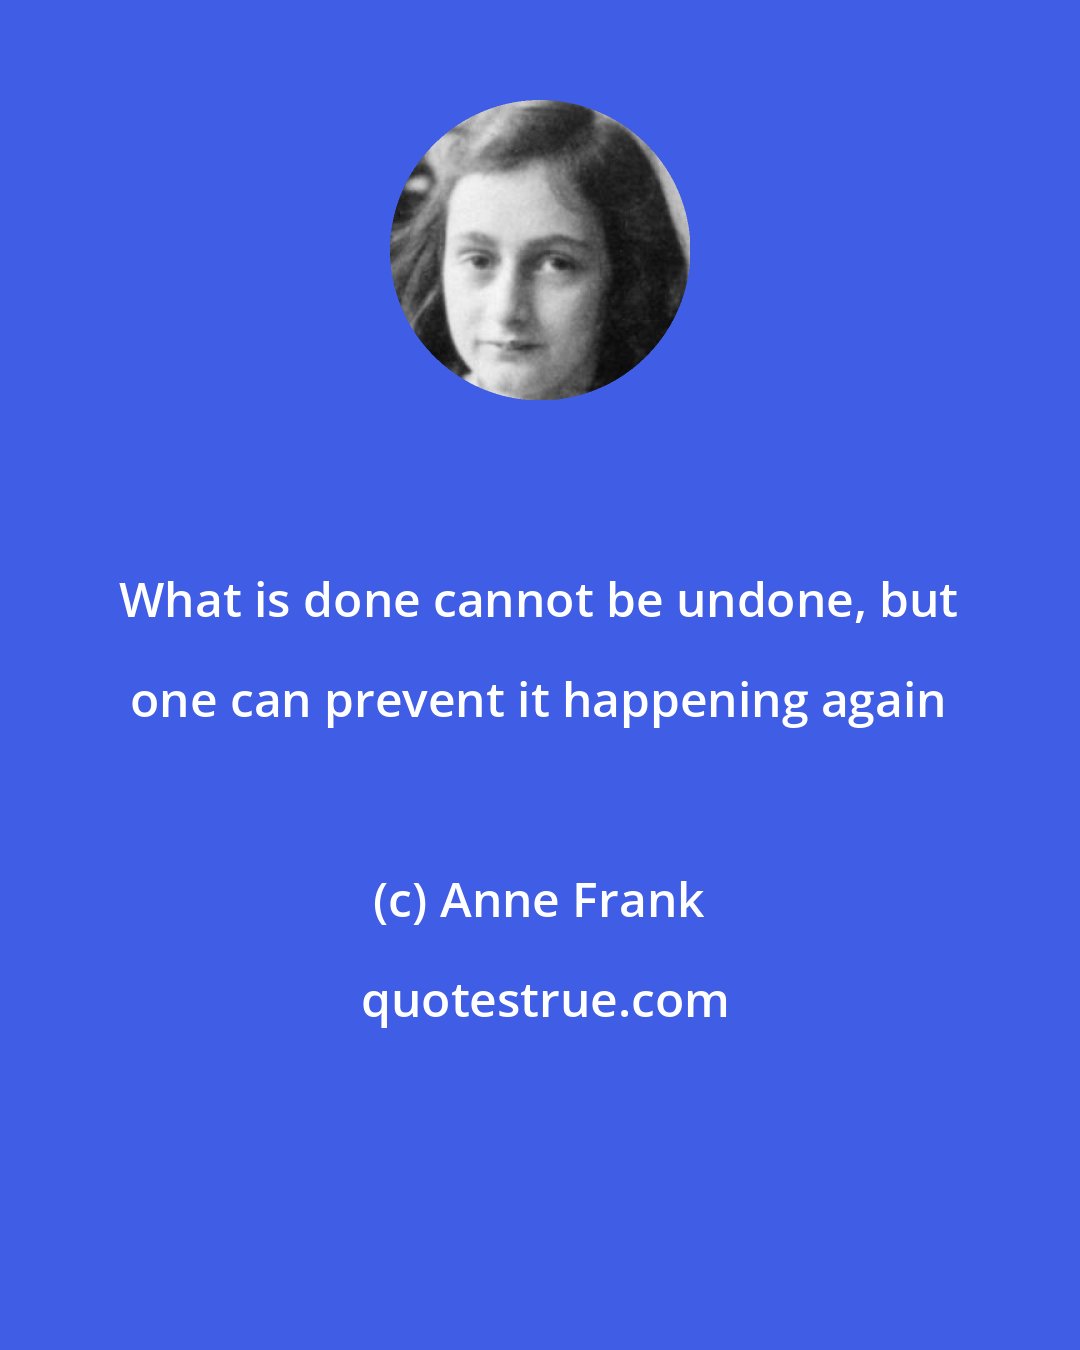 Anne Frank: What is done cannot be undone, but one can prevent it happening again